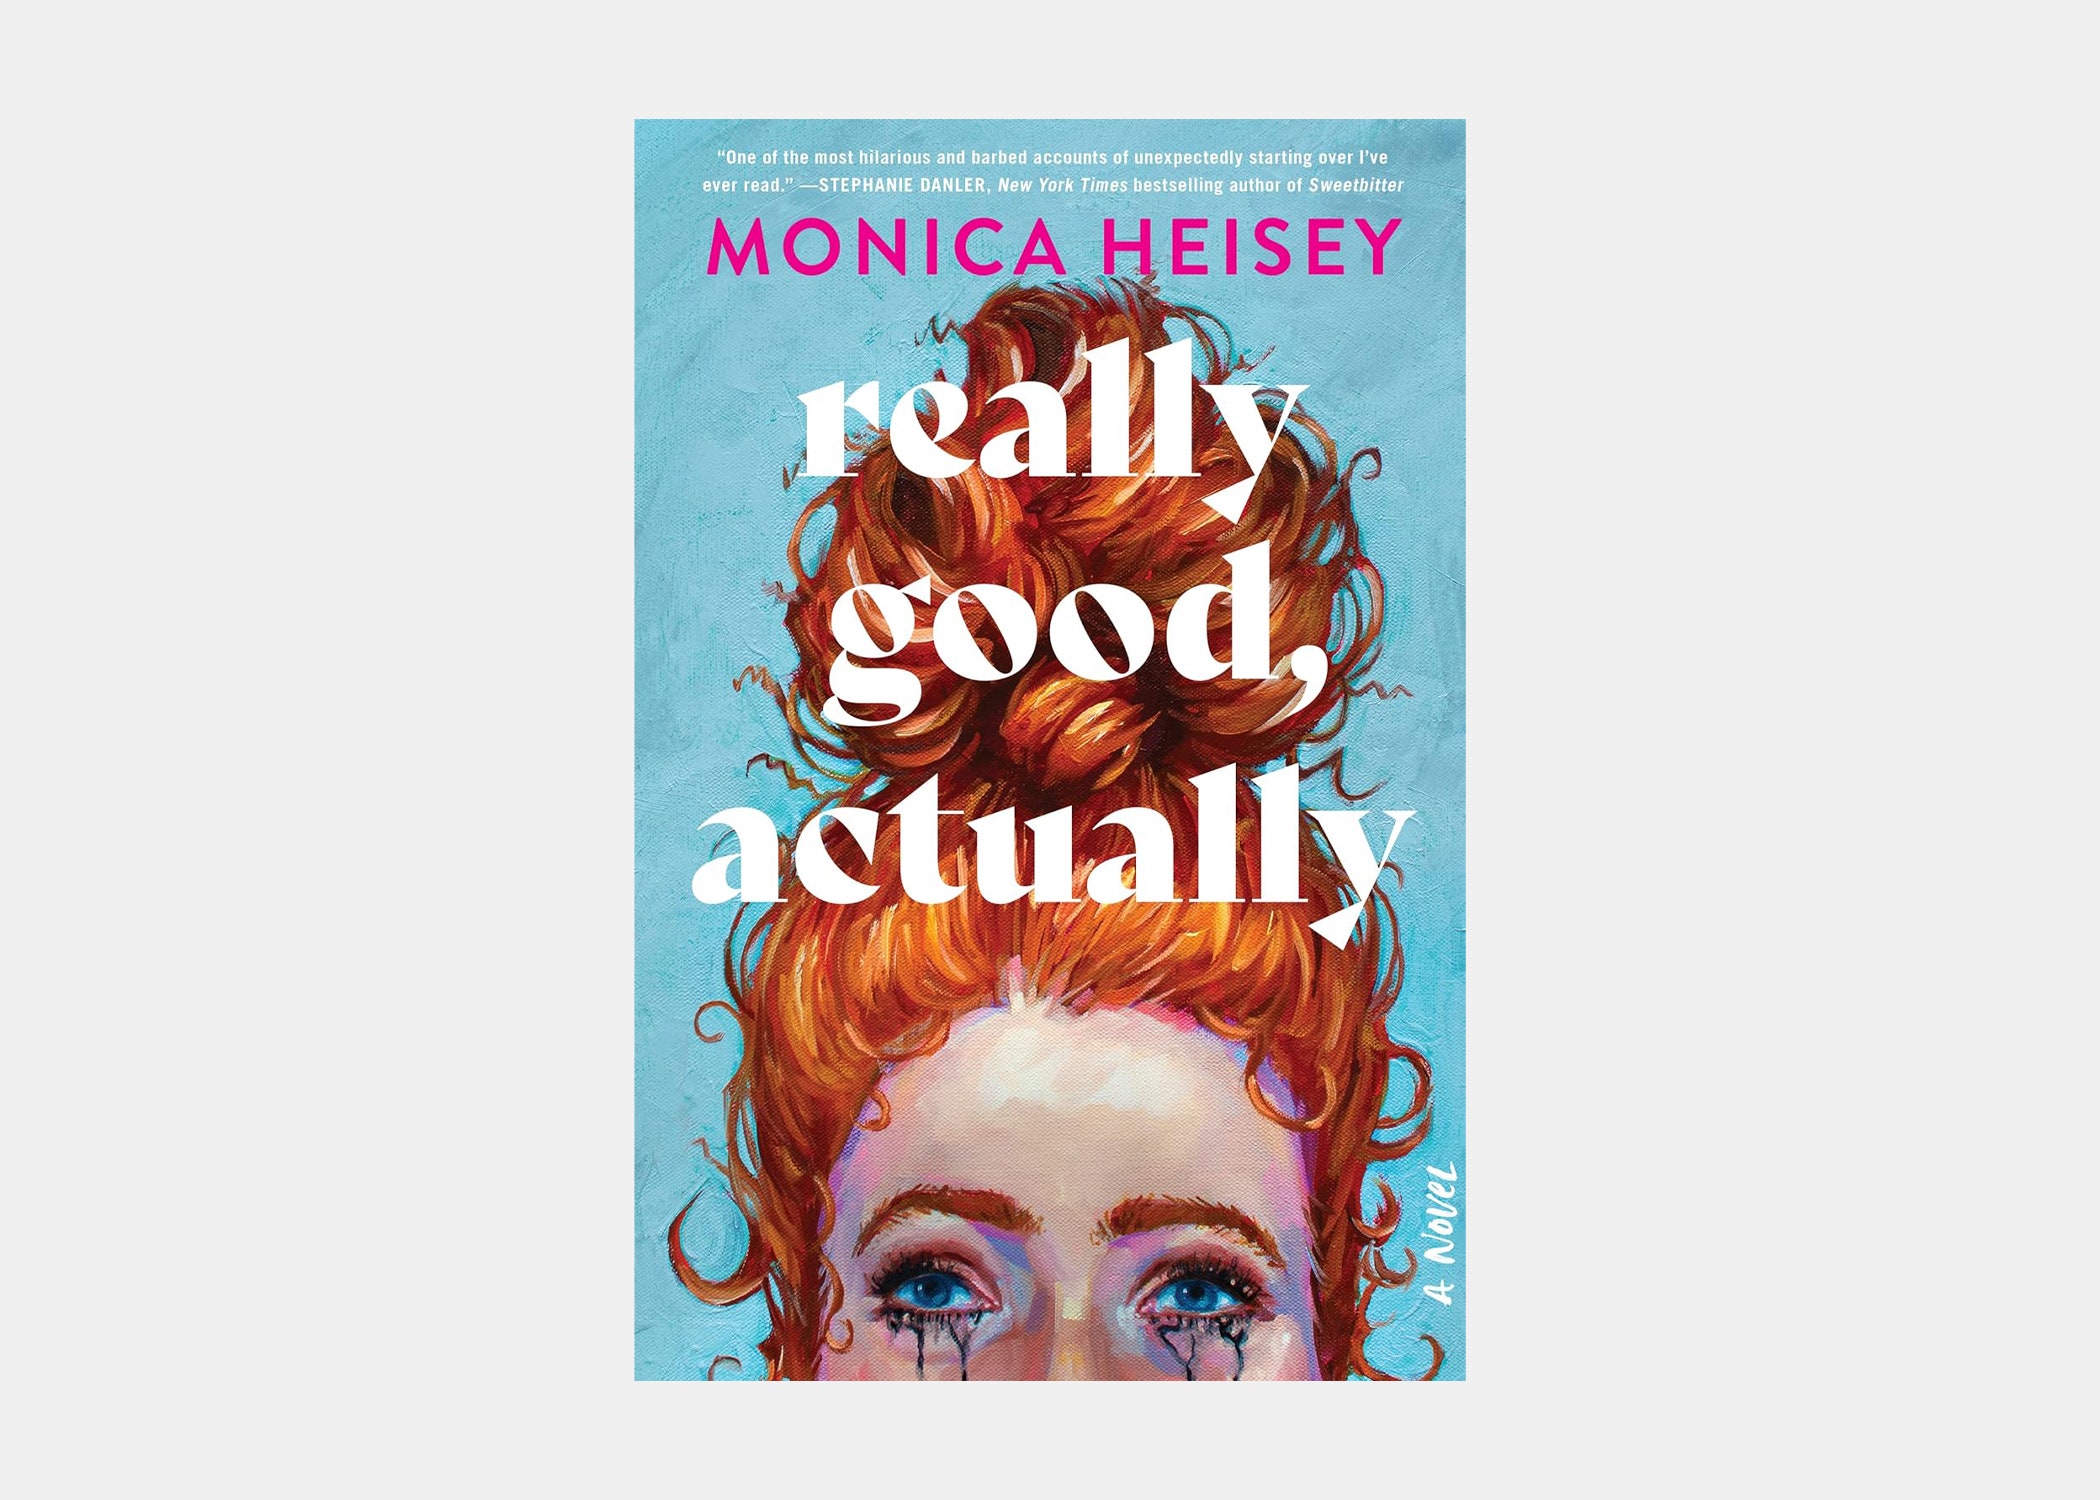 <p><em>Really Good, Actually</em> is Monica Heisey's debut novel centered around a young and recently divorced Maggie. You want to support her throughout the book and feel warm as you watch her character develop. It’s messy, joyful, and relatable to many.</p> <p><strong>Page count:</strong> 384</p> <p><strong>Average read time:</strong> 5 hours and 15 minutes</p> $14, Amazon. <a href="https://www.amazon.com/Really-Good-Actually-Monica-Heisey/dp/0063235412/ref=sr_1_1">Get it now!</a><p>Sign up to receive the latest news, expert tips, and inspiration on all things travel</p><a href="https://www.cntraveler.com/newsletter/the-daily?sourceCode=msnsend">Inspire Me</a>